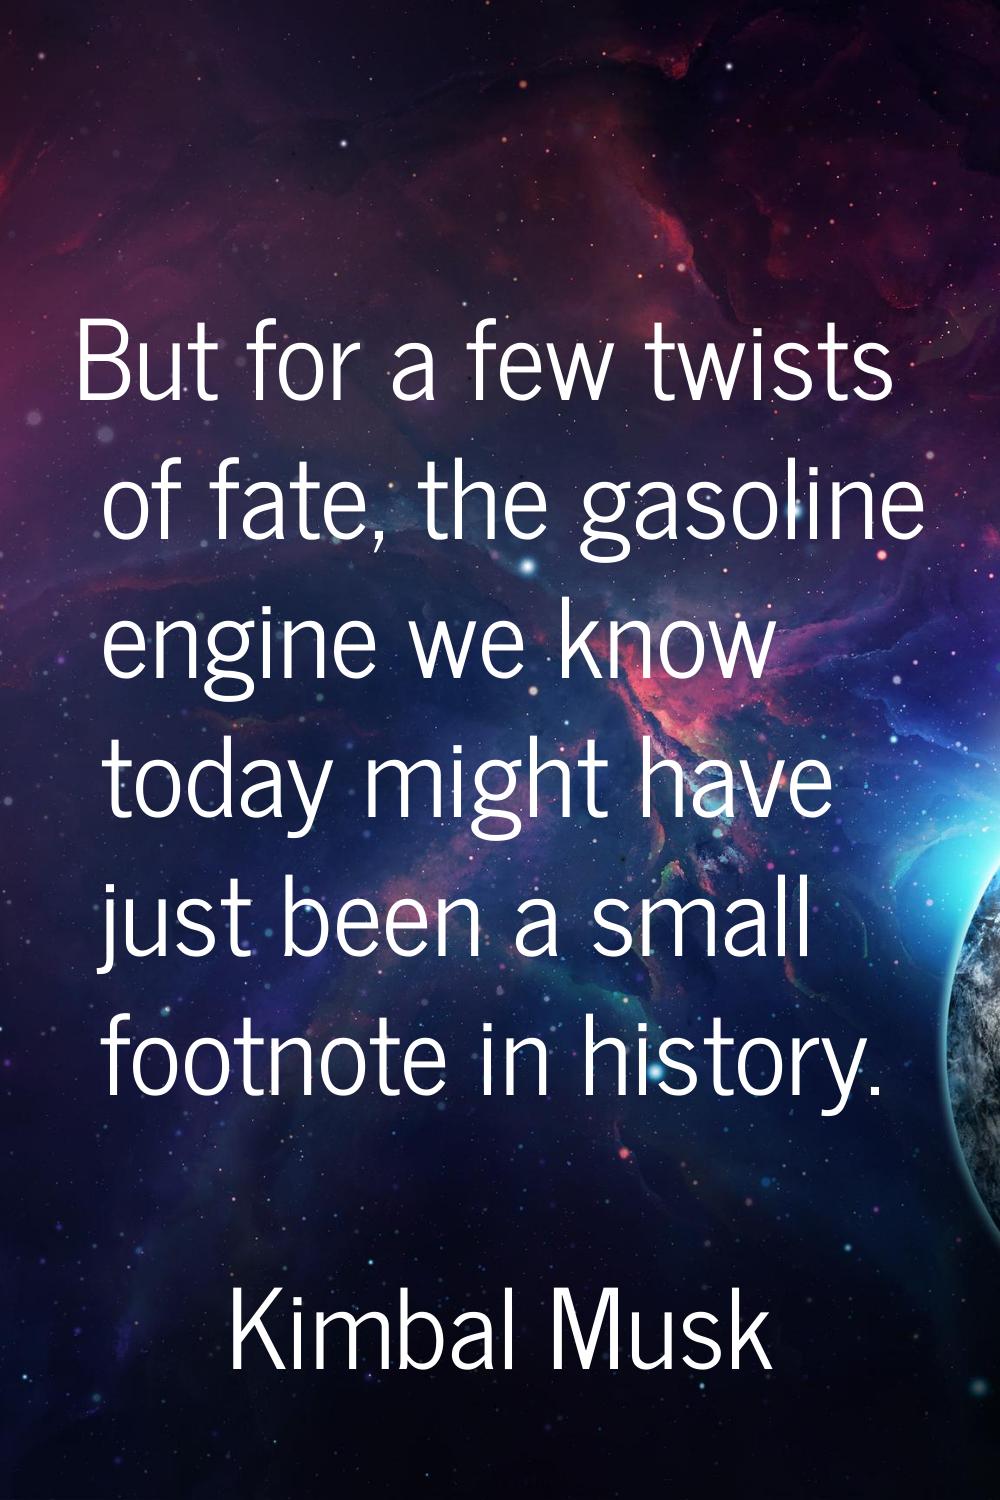 But for a few twists of fate, the gasoline engine we know today might have just been a small footno